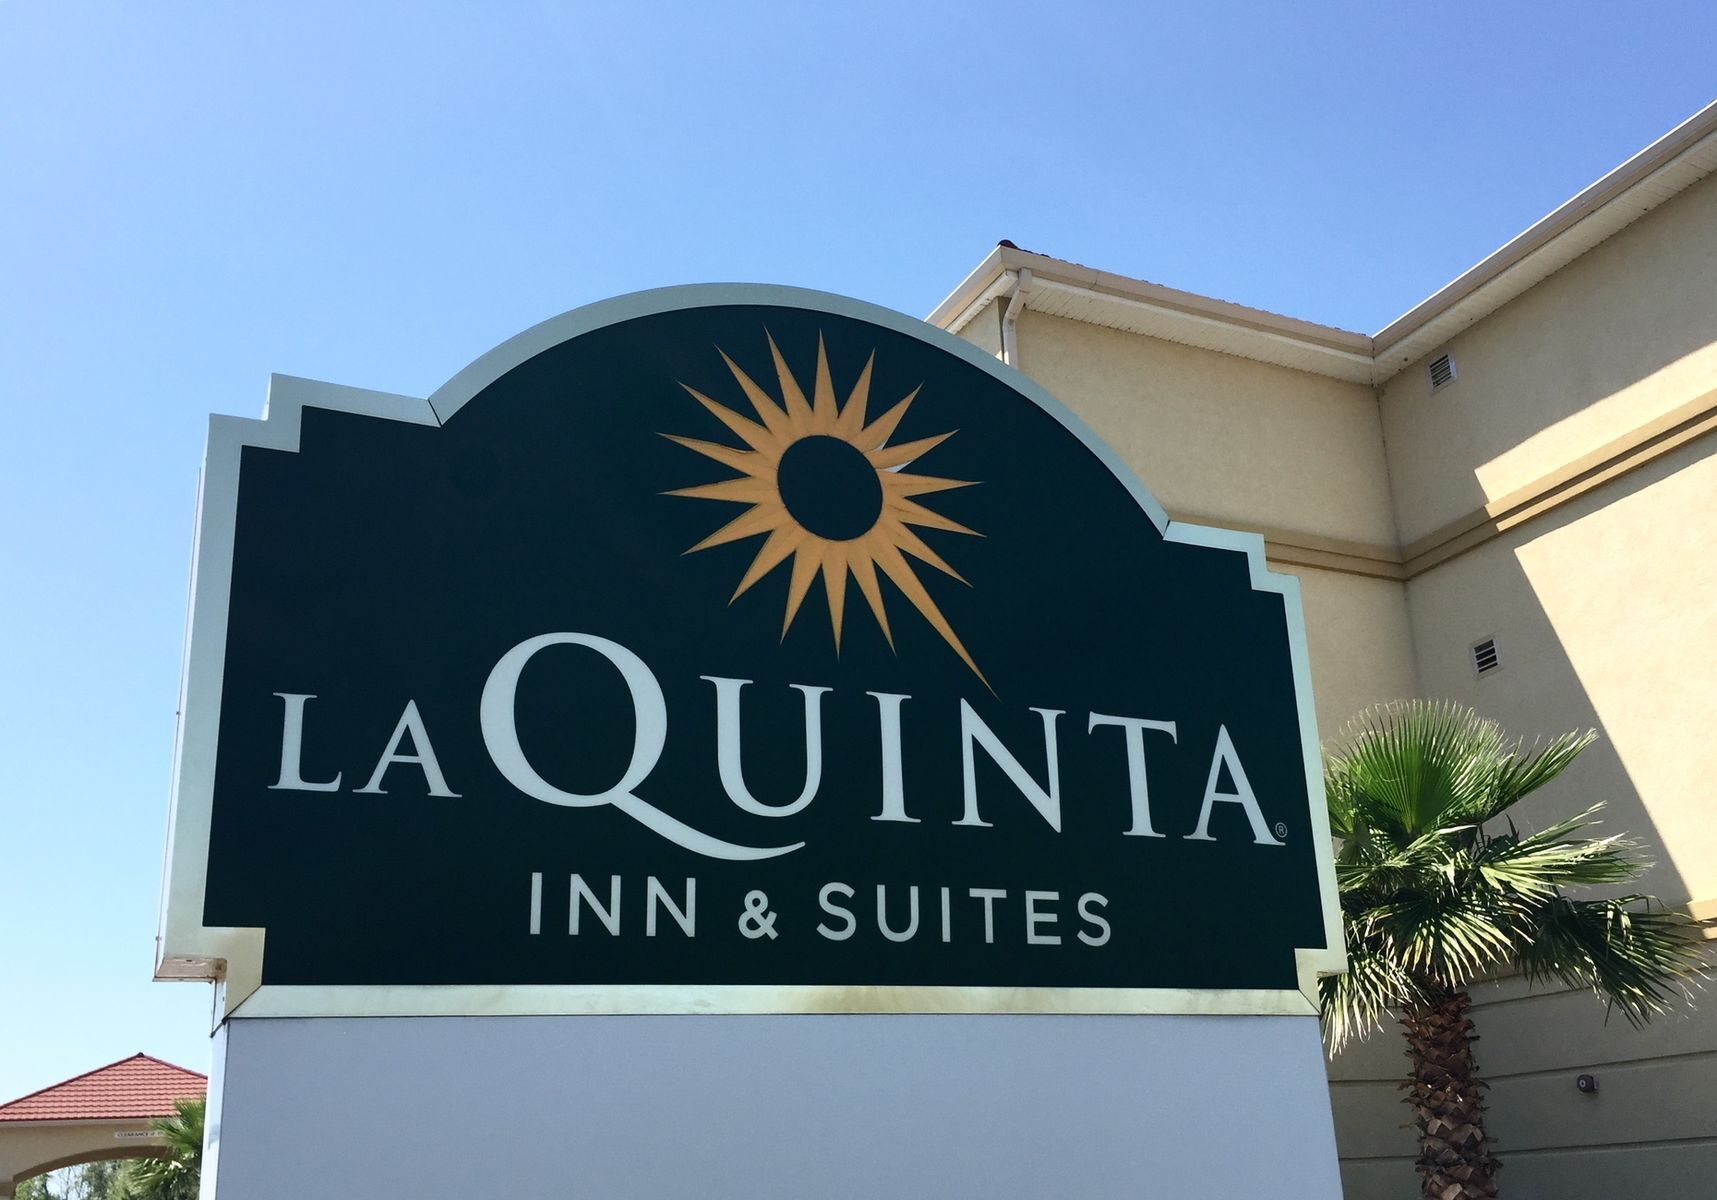 <p>Founded in San Antonio, Texas, in 1968, La Quinta joined the Wyndham family as part of a <a href="https://www.prnewswire.com/news-releases/wyndham-worldwide-completes-acquisition-of-la-quinta-holdings-300657122.html">US$1.95-billion acquisition in 2018</a>. Marketed as a family line of hotels, La Quinta offers <a href="https://www.wyndhamhotels.com/laquinta/about-us">free breakfast and pet-friendly hotel rooms</a> with contemporary designs. In total, the brand operates 916 locations across North, Central, and South America.</p>